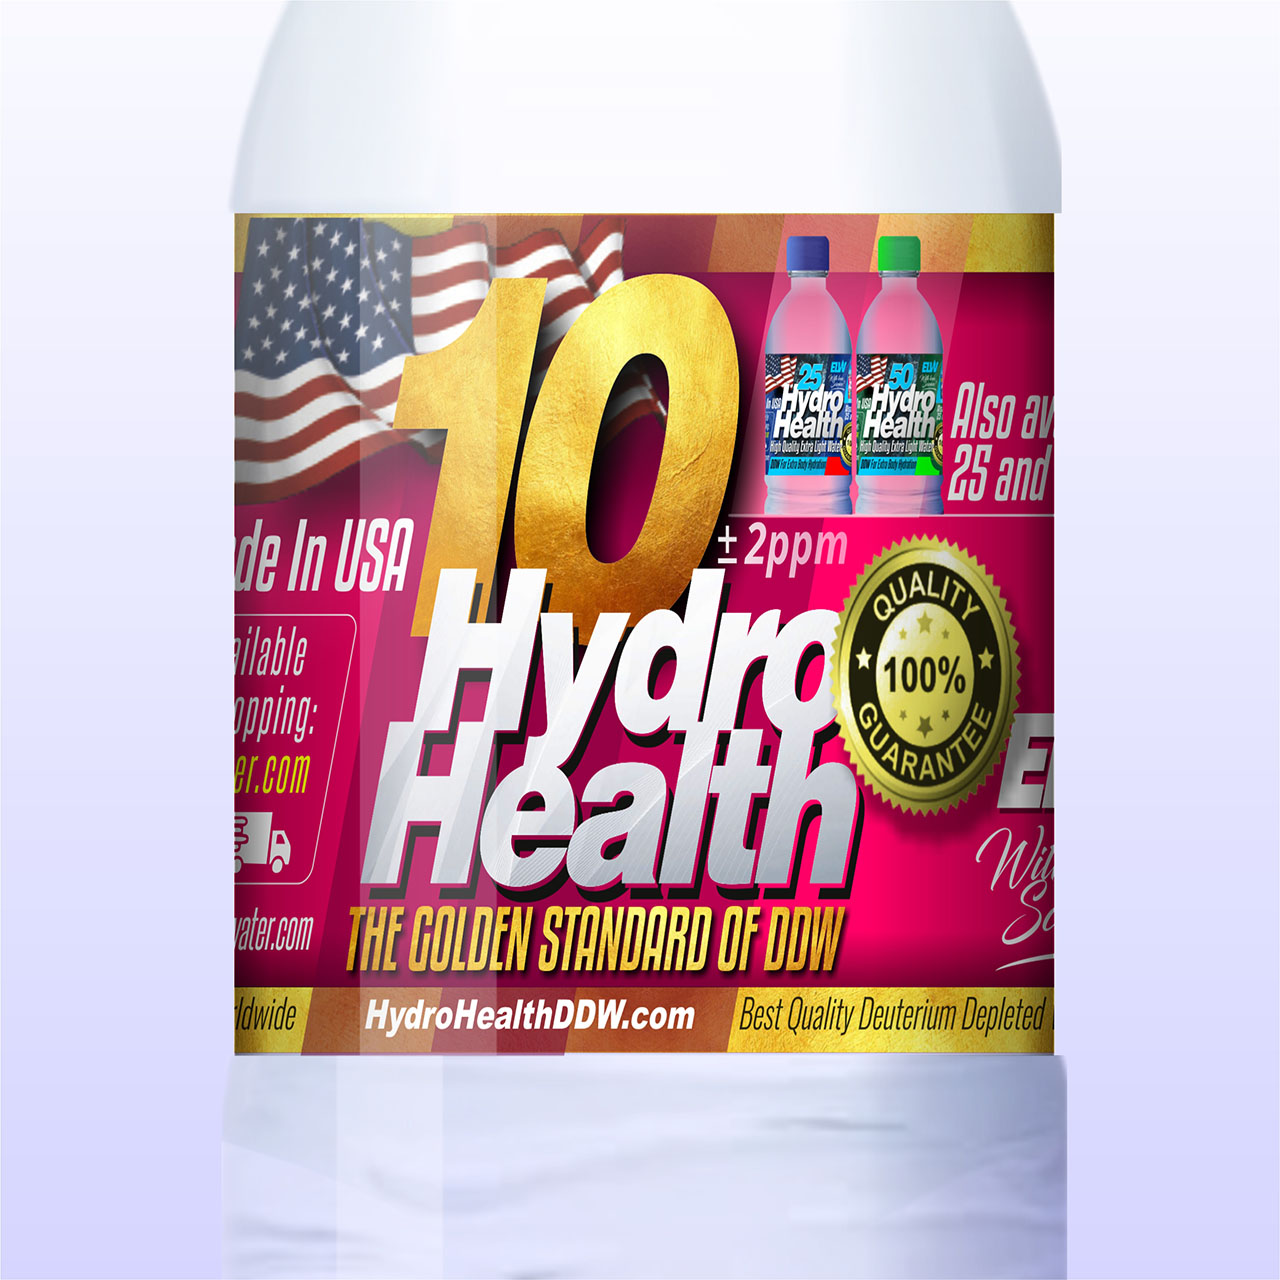 10 ppm Hydro-Health-Promo Price ONLY $255 for one case of 24 bottles (one bottle: $10.60 delivered)  x 500 ML each =12 LITERS - including S&H- it is cheaper compared to 10 ppm DDW, $14-$16 per 500 ML that other vendors sell from Russia